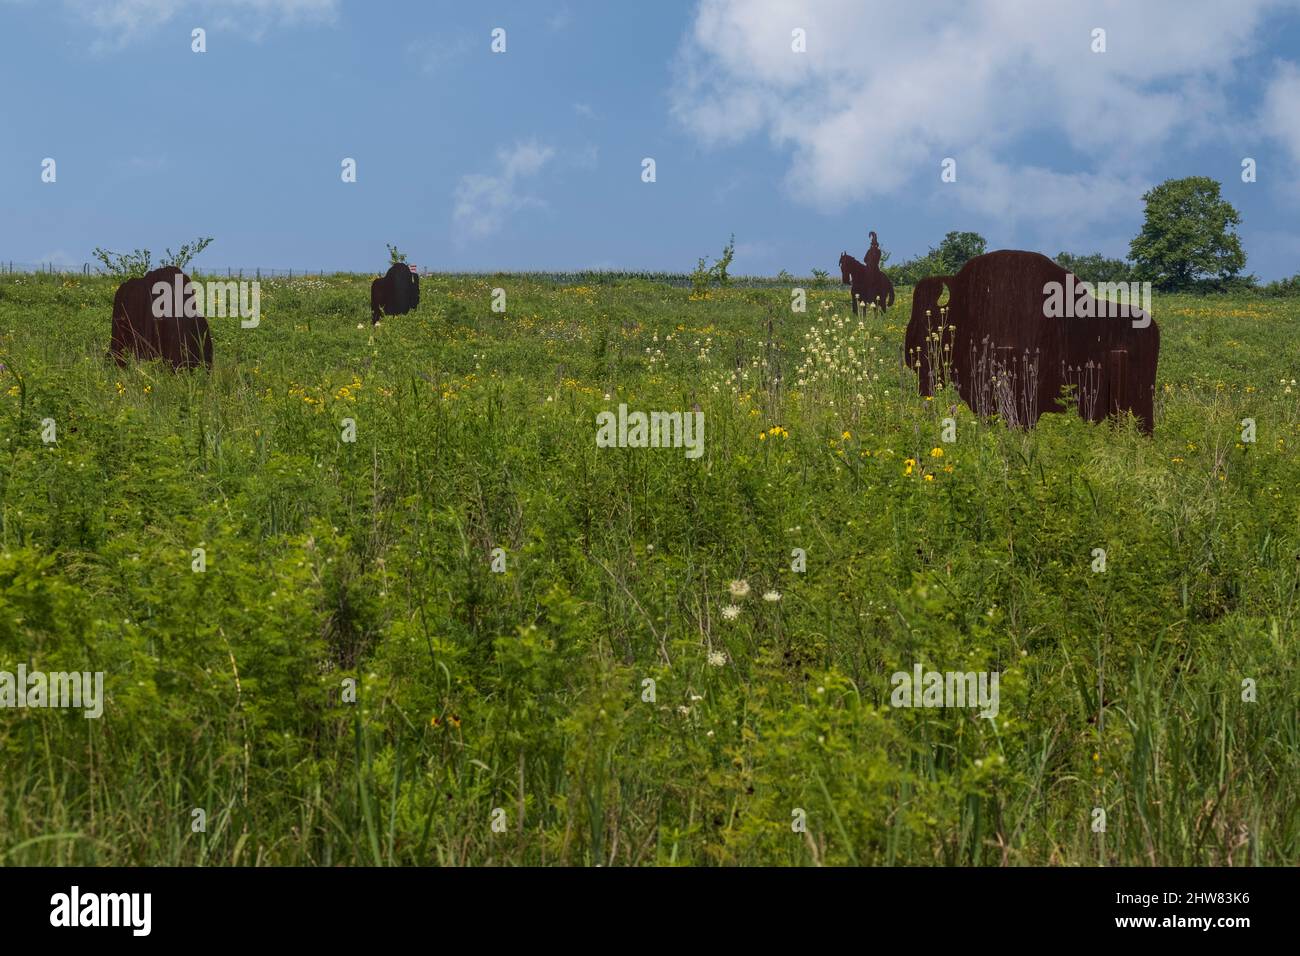 Buffalo and Indian Brave Sculpture in Prarie Grassland, Missouri Welcome Center, Highway I-35. Stockfoto